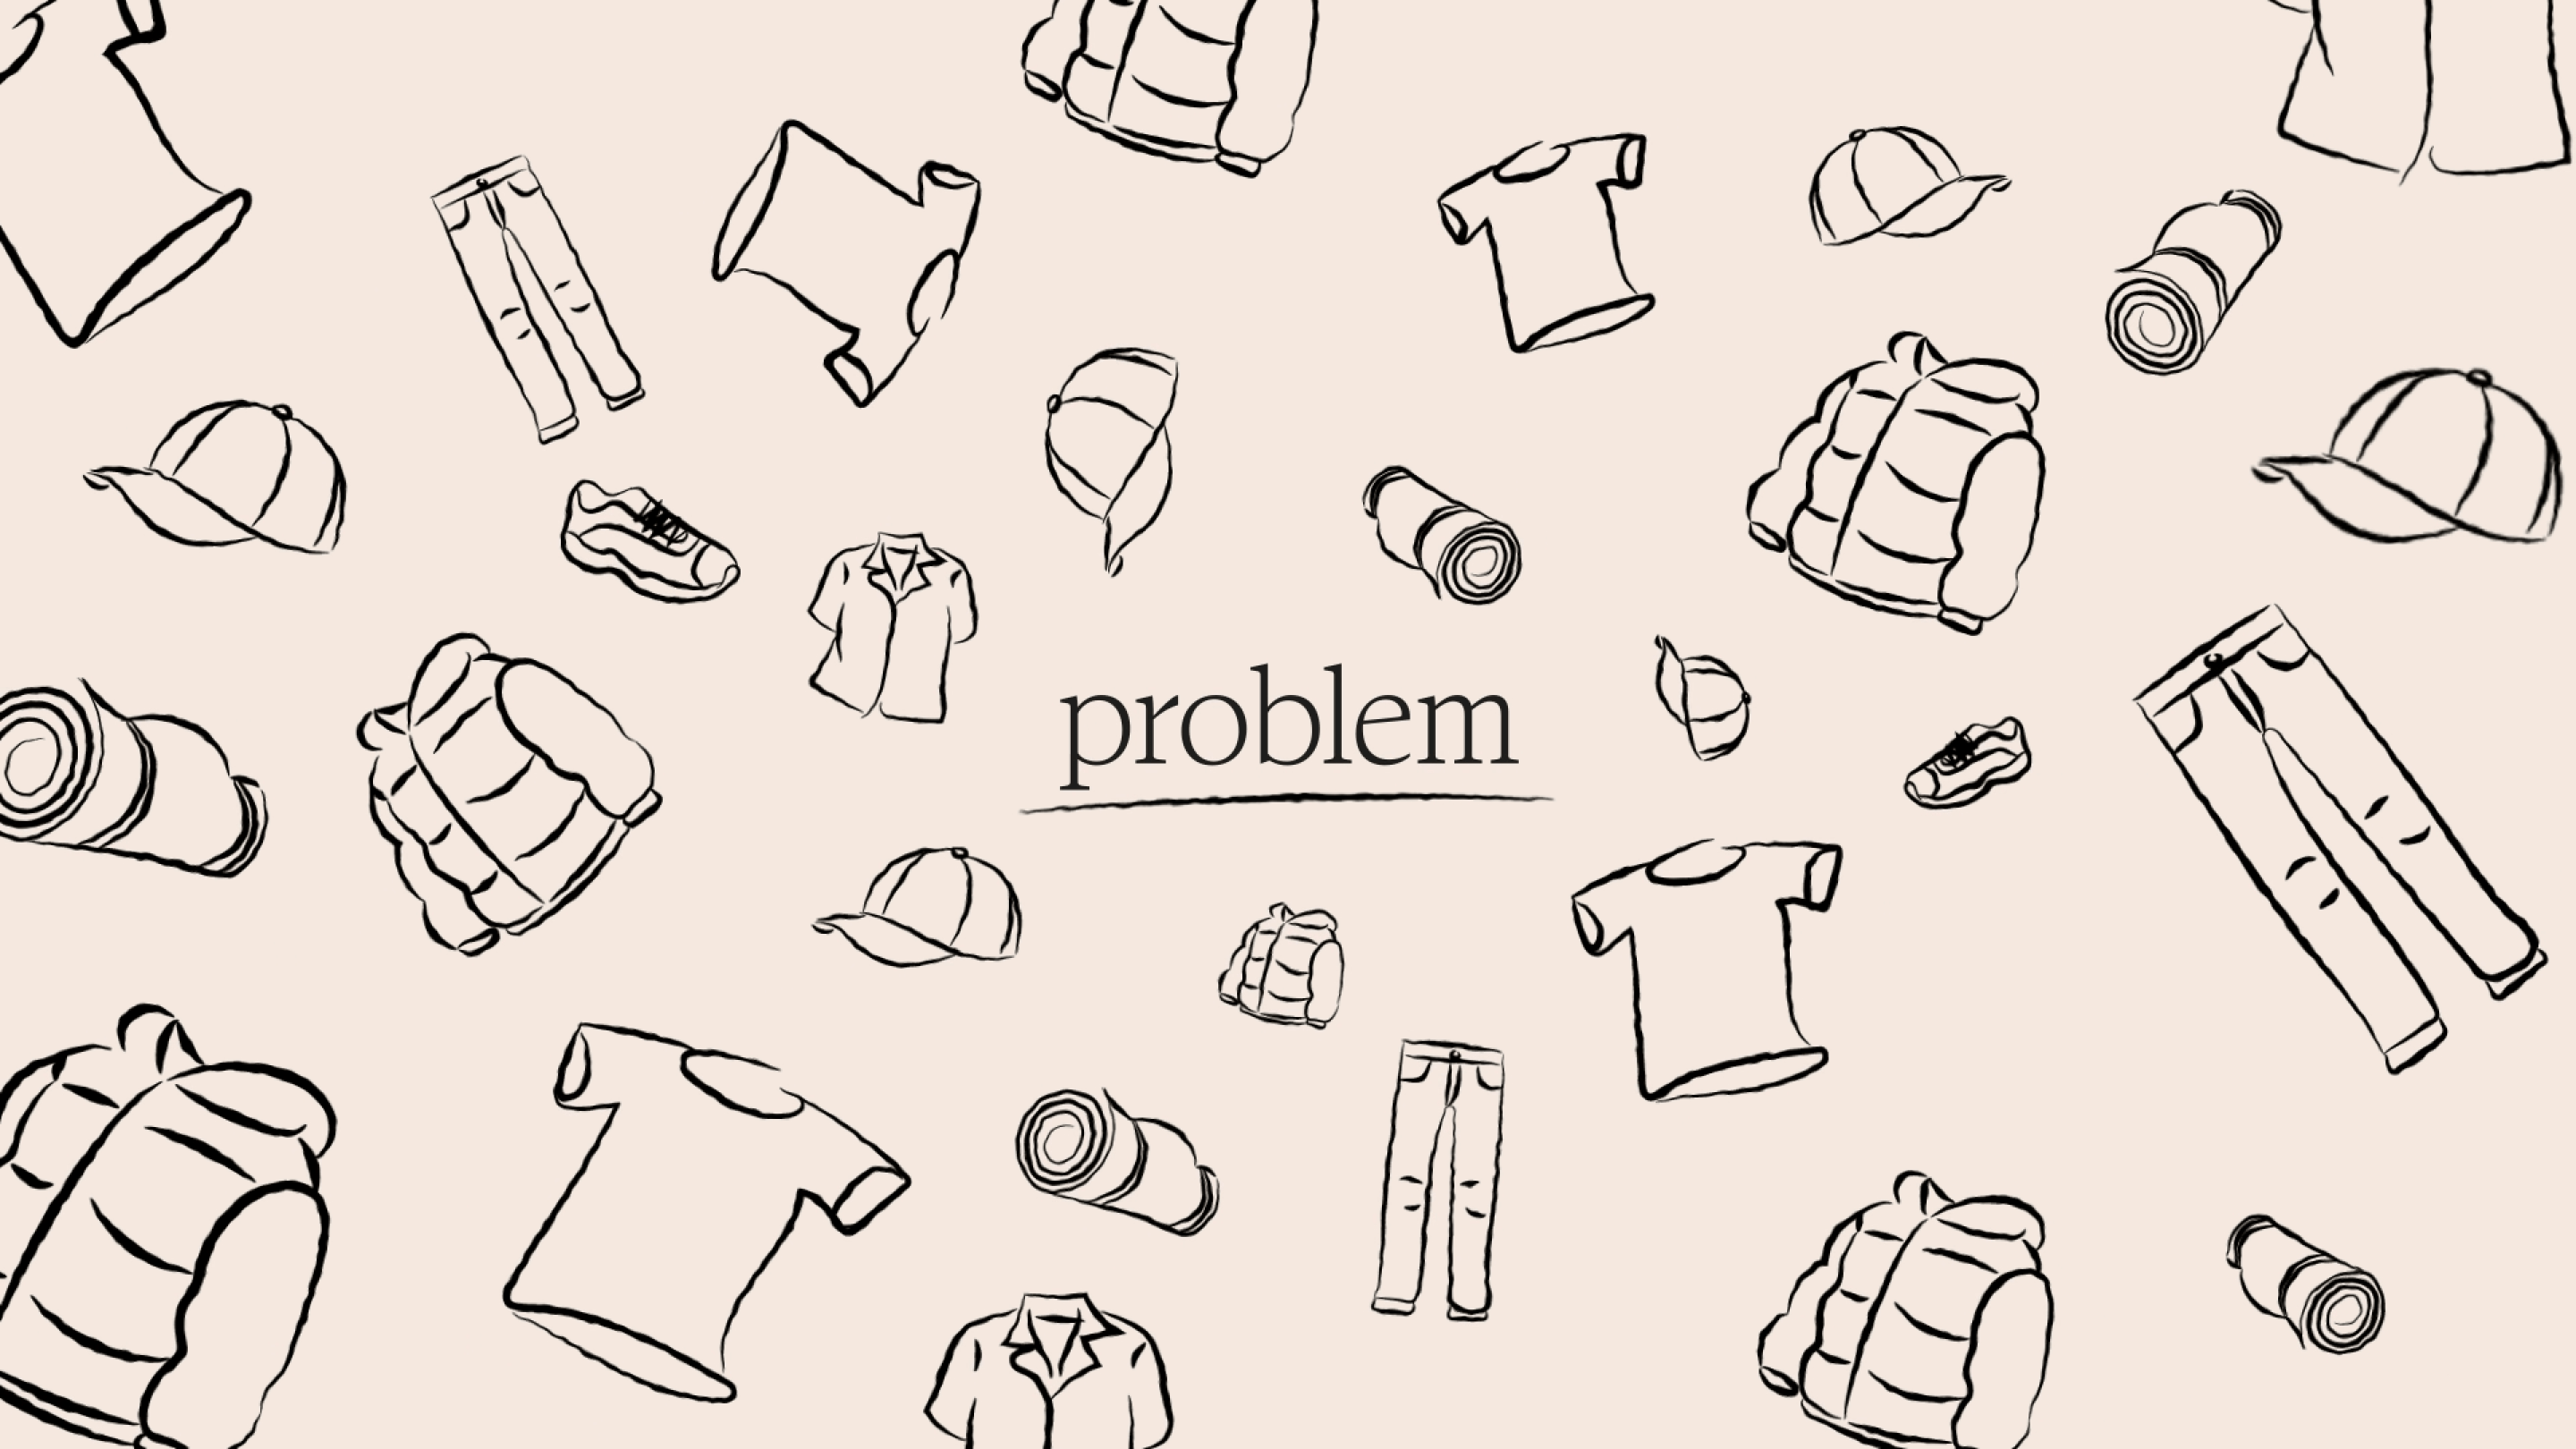 Illustration of waste items such as shirts, jeans and jackets